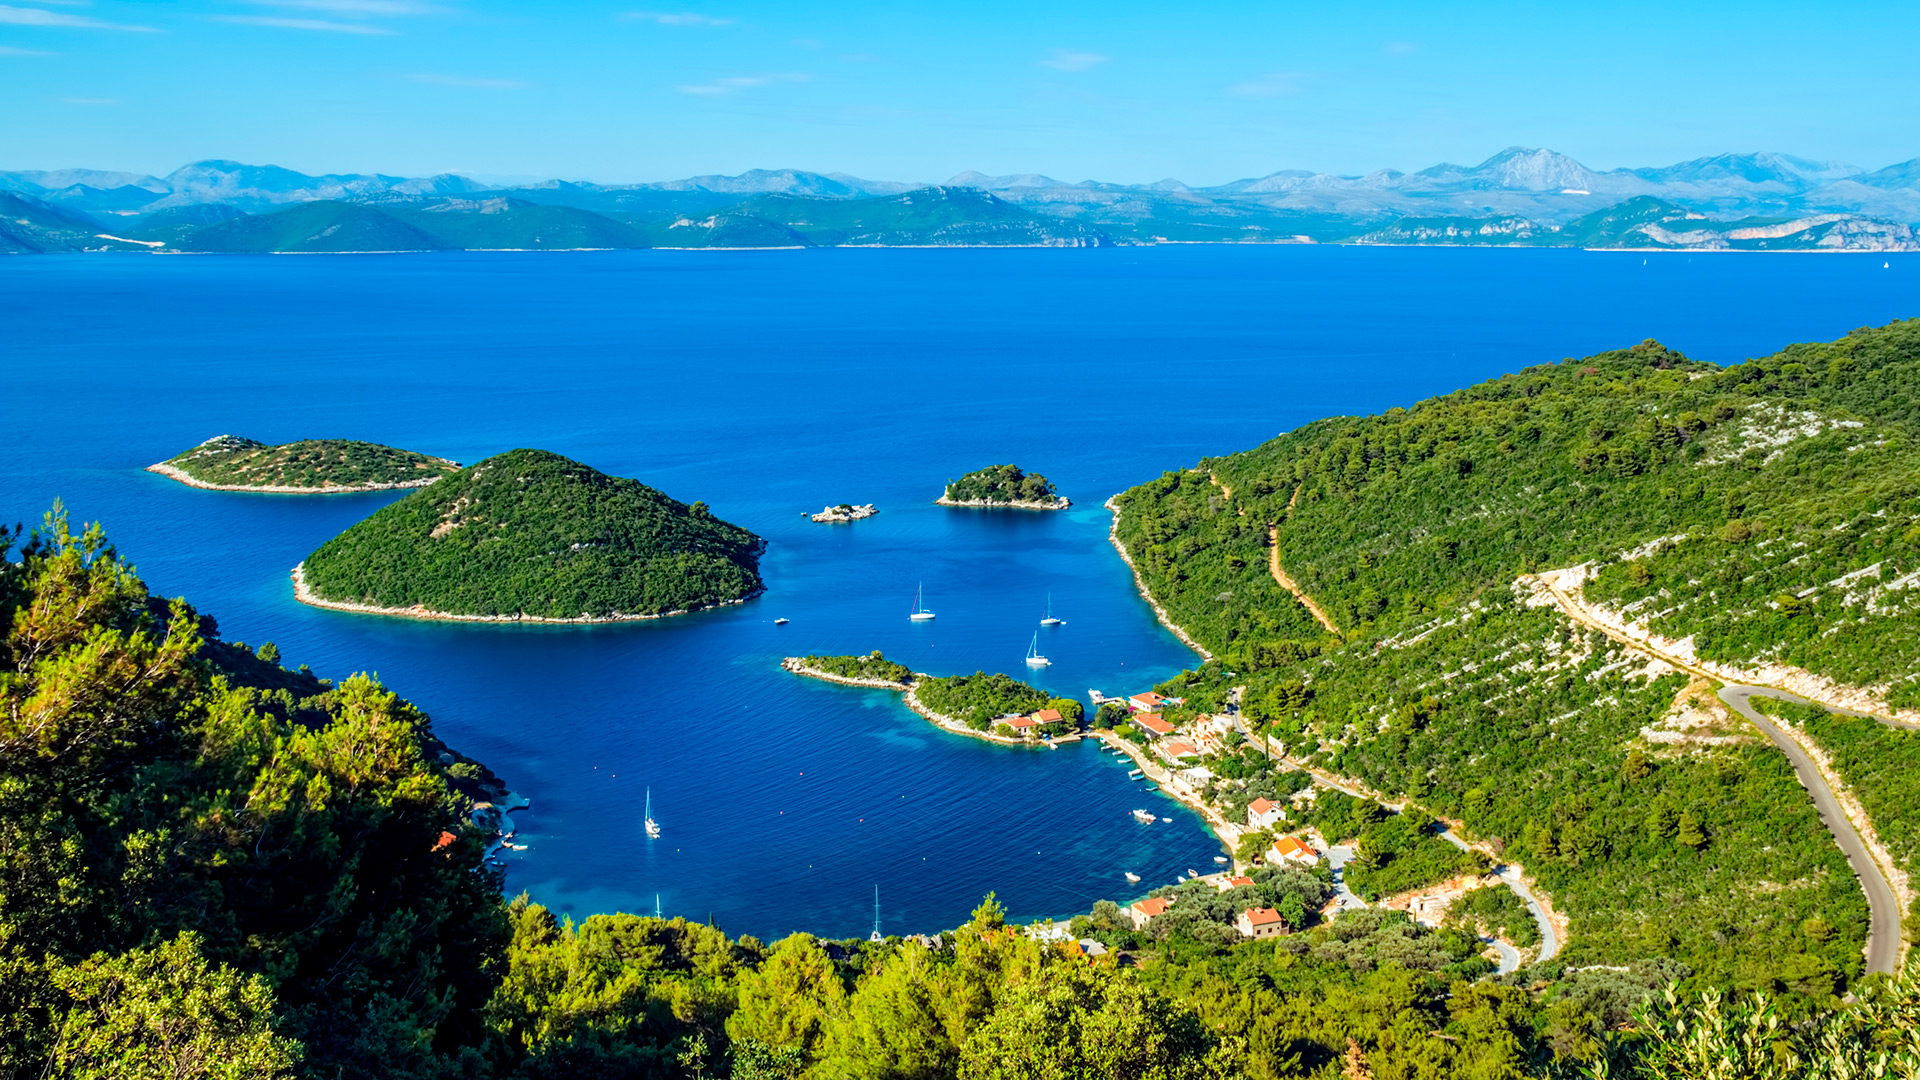 The view from the island of Mljet on Panak and Borovac islands, Croatia - Adriatic sailing routes of SimpleSail